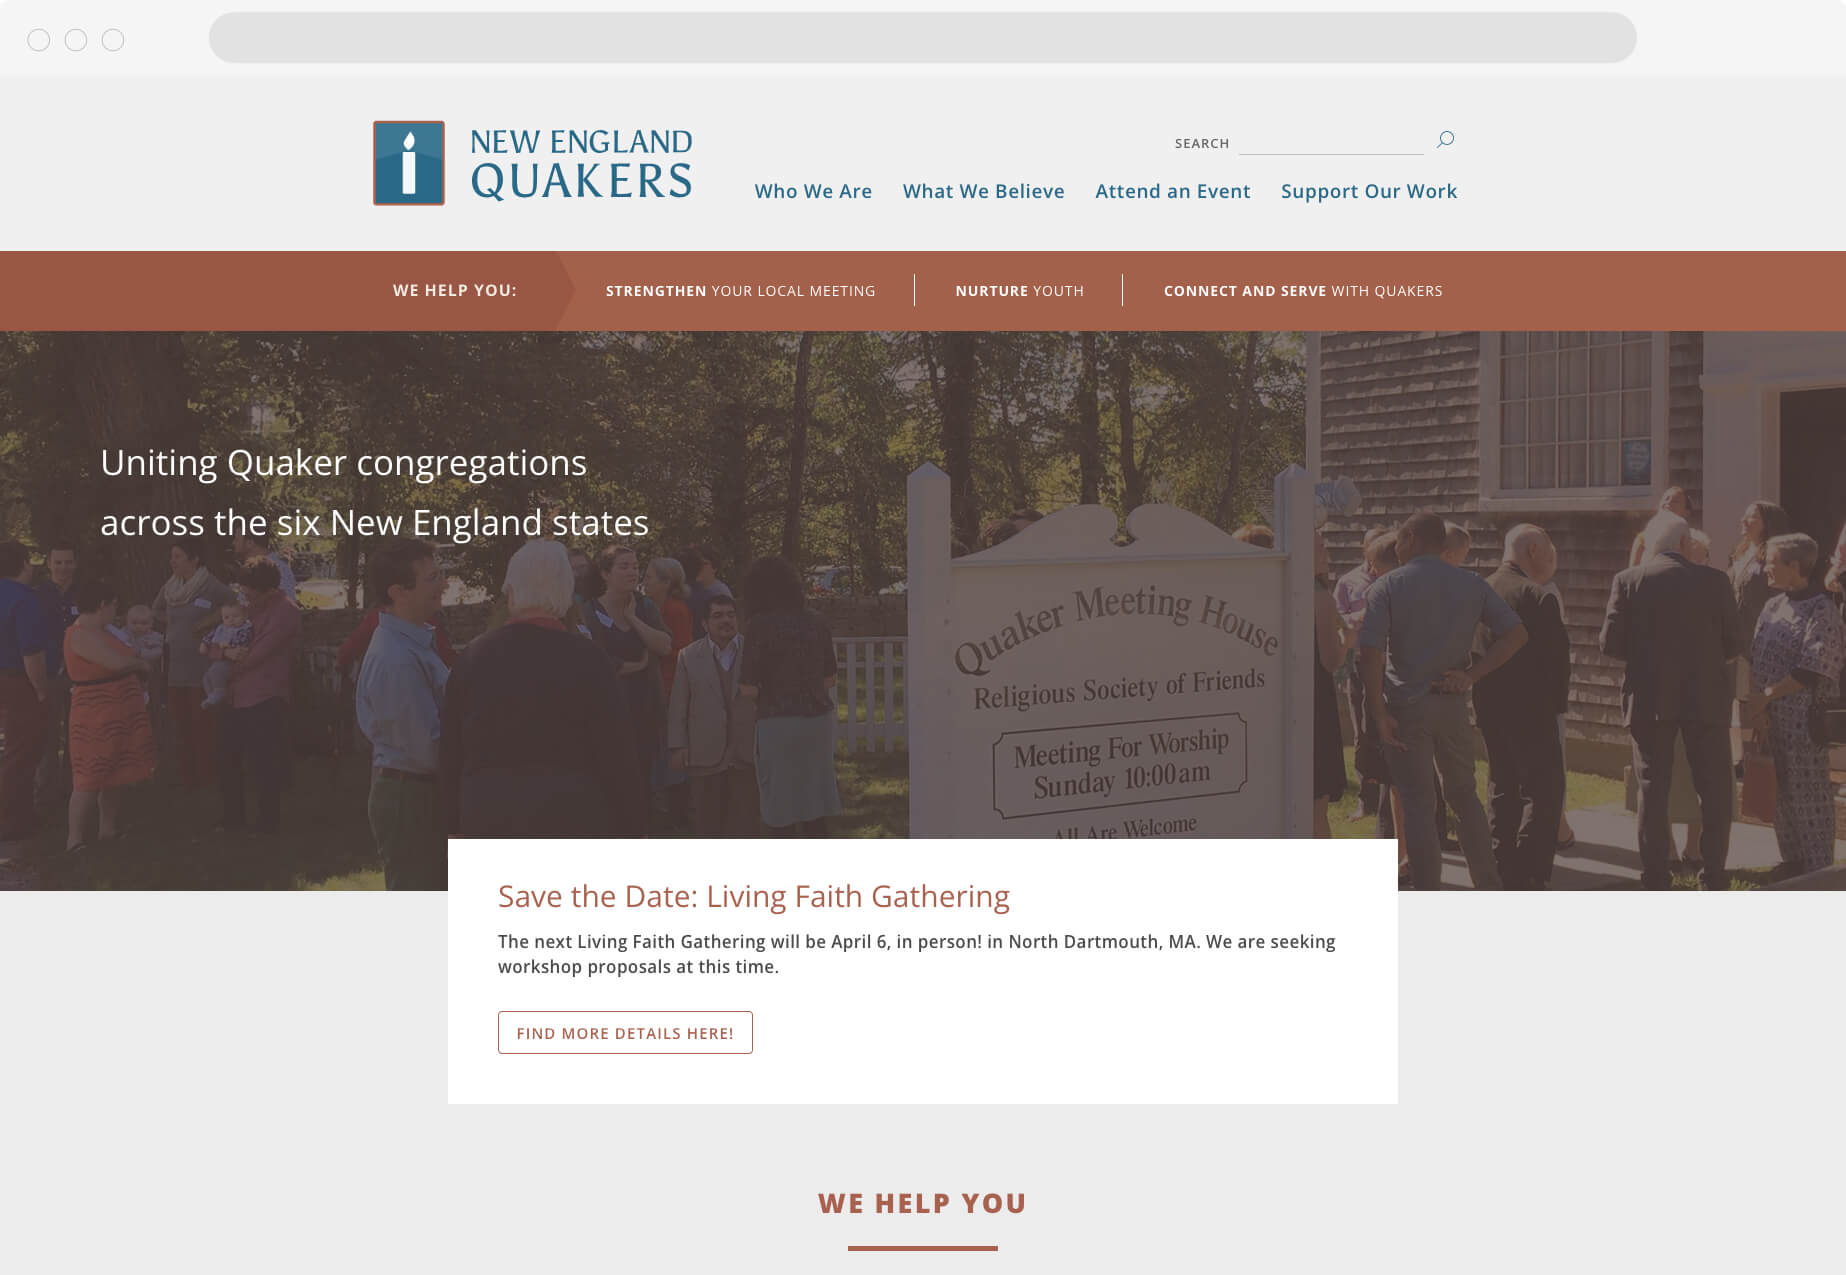 A homepage with words "Uniting Quaker congregations across the six New England states" and a background image of a large gathering of people in front of the a Quaker Meeting House". The homepage also highlights a Save the Date section for the next Living Faith Gathering. 